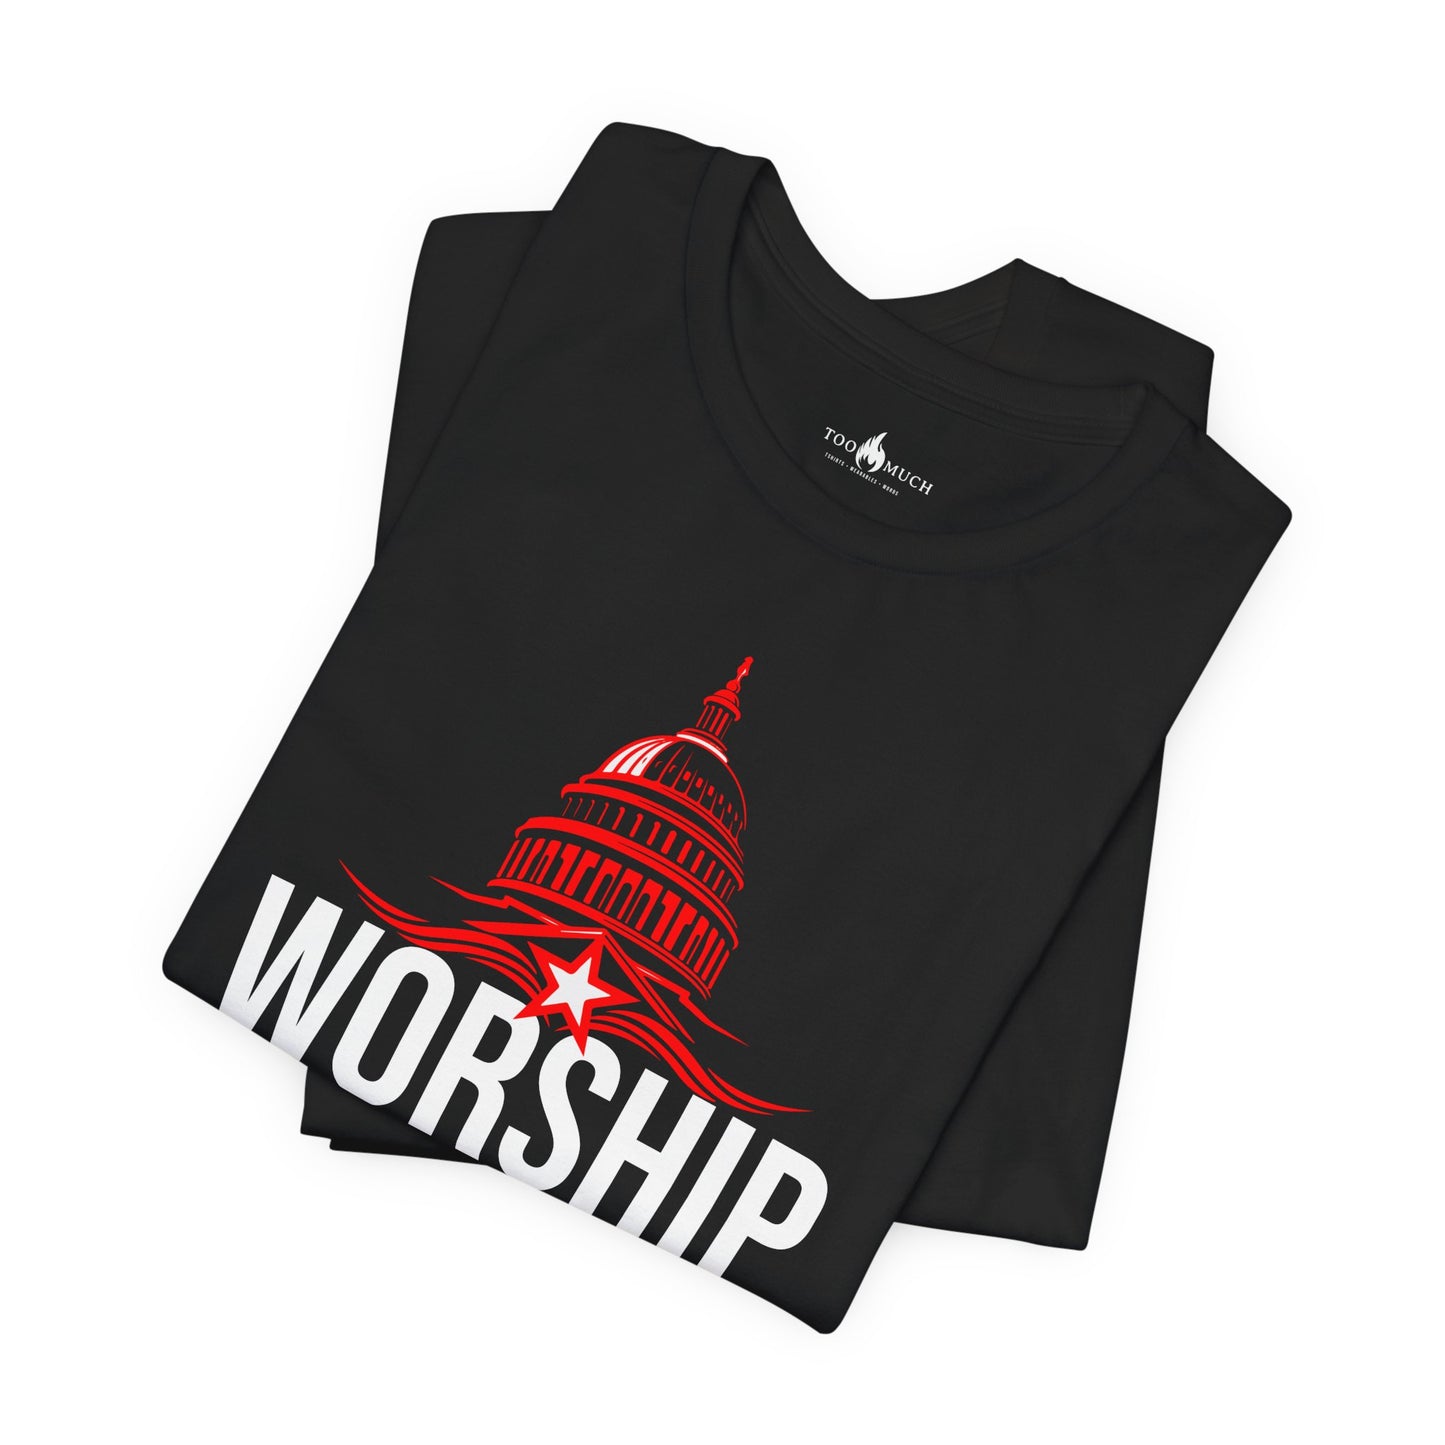 Worship Cathedral Unisex Tee